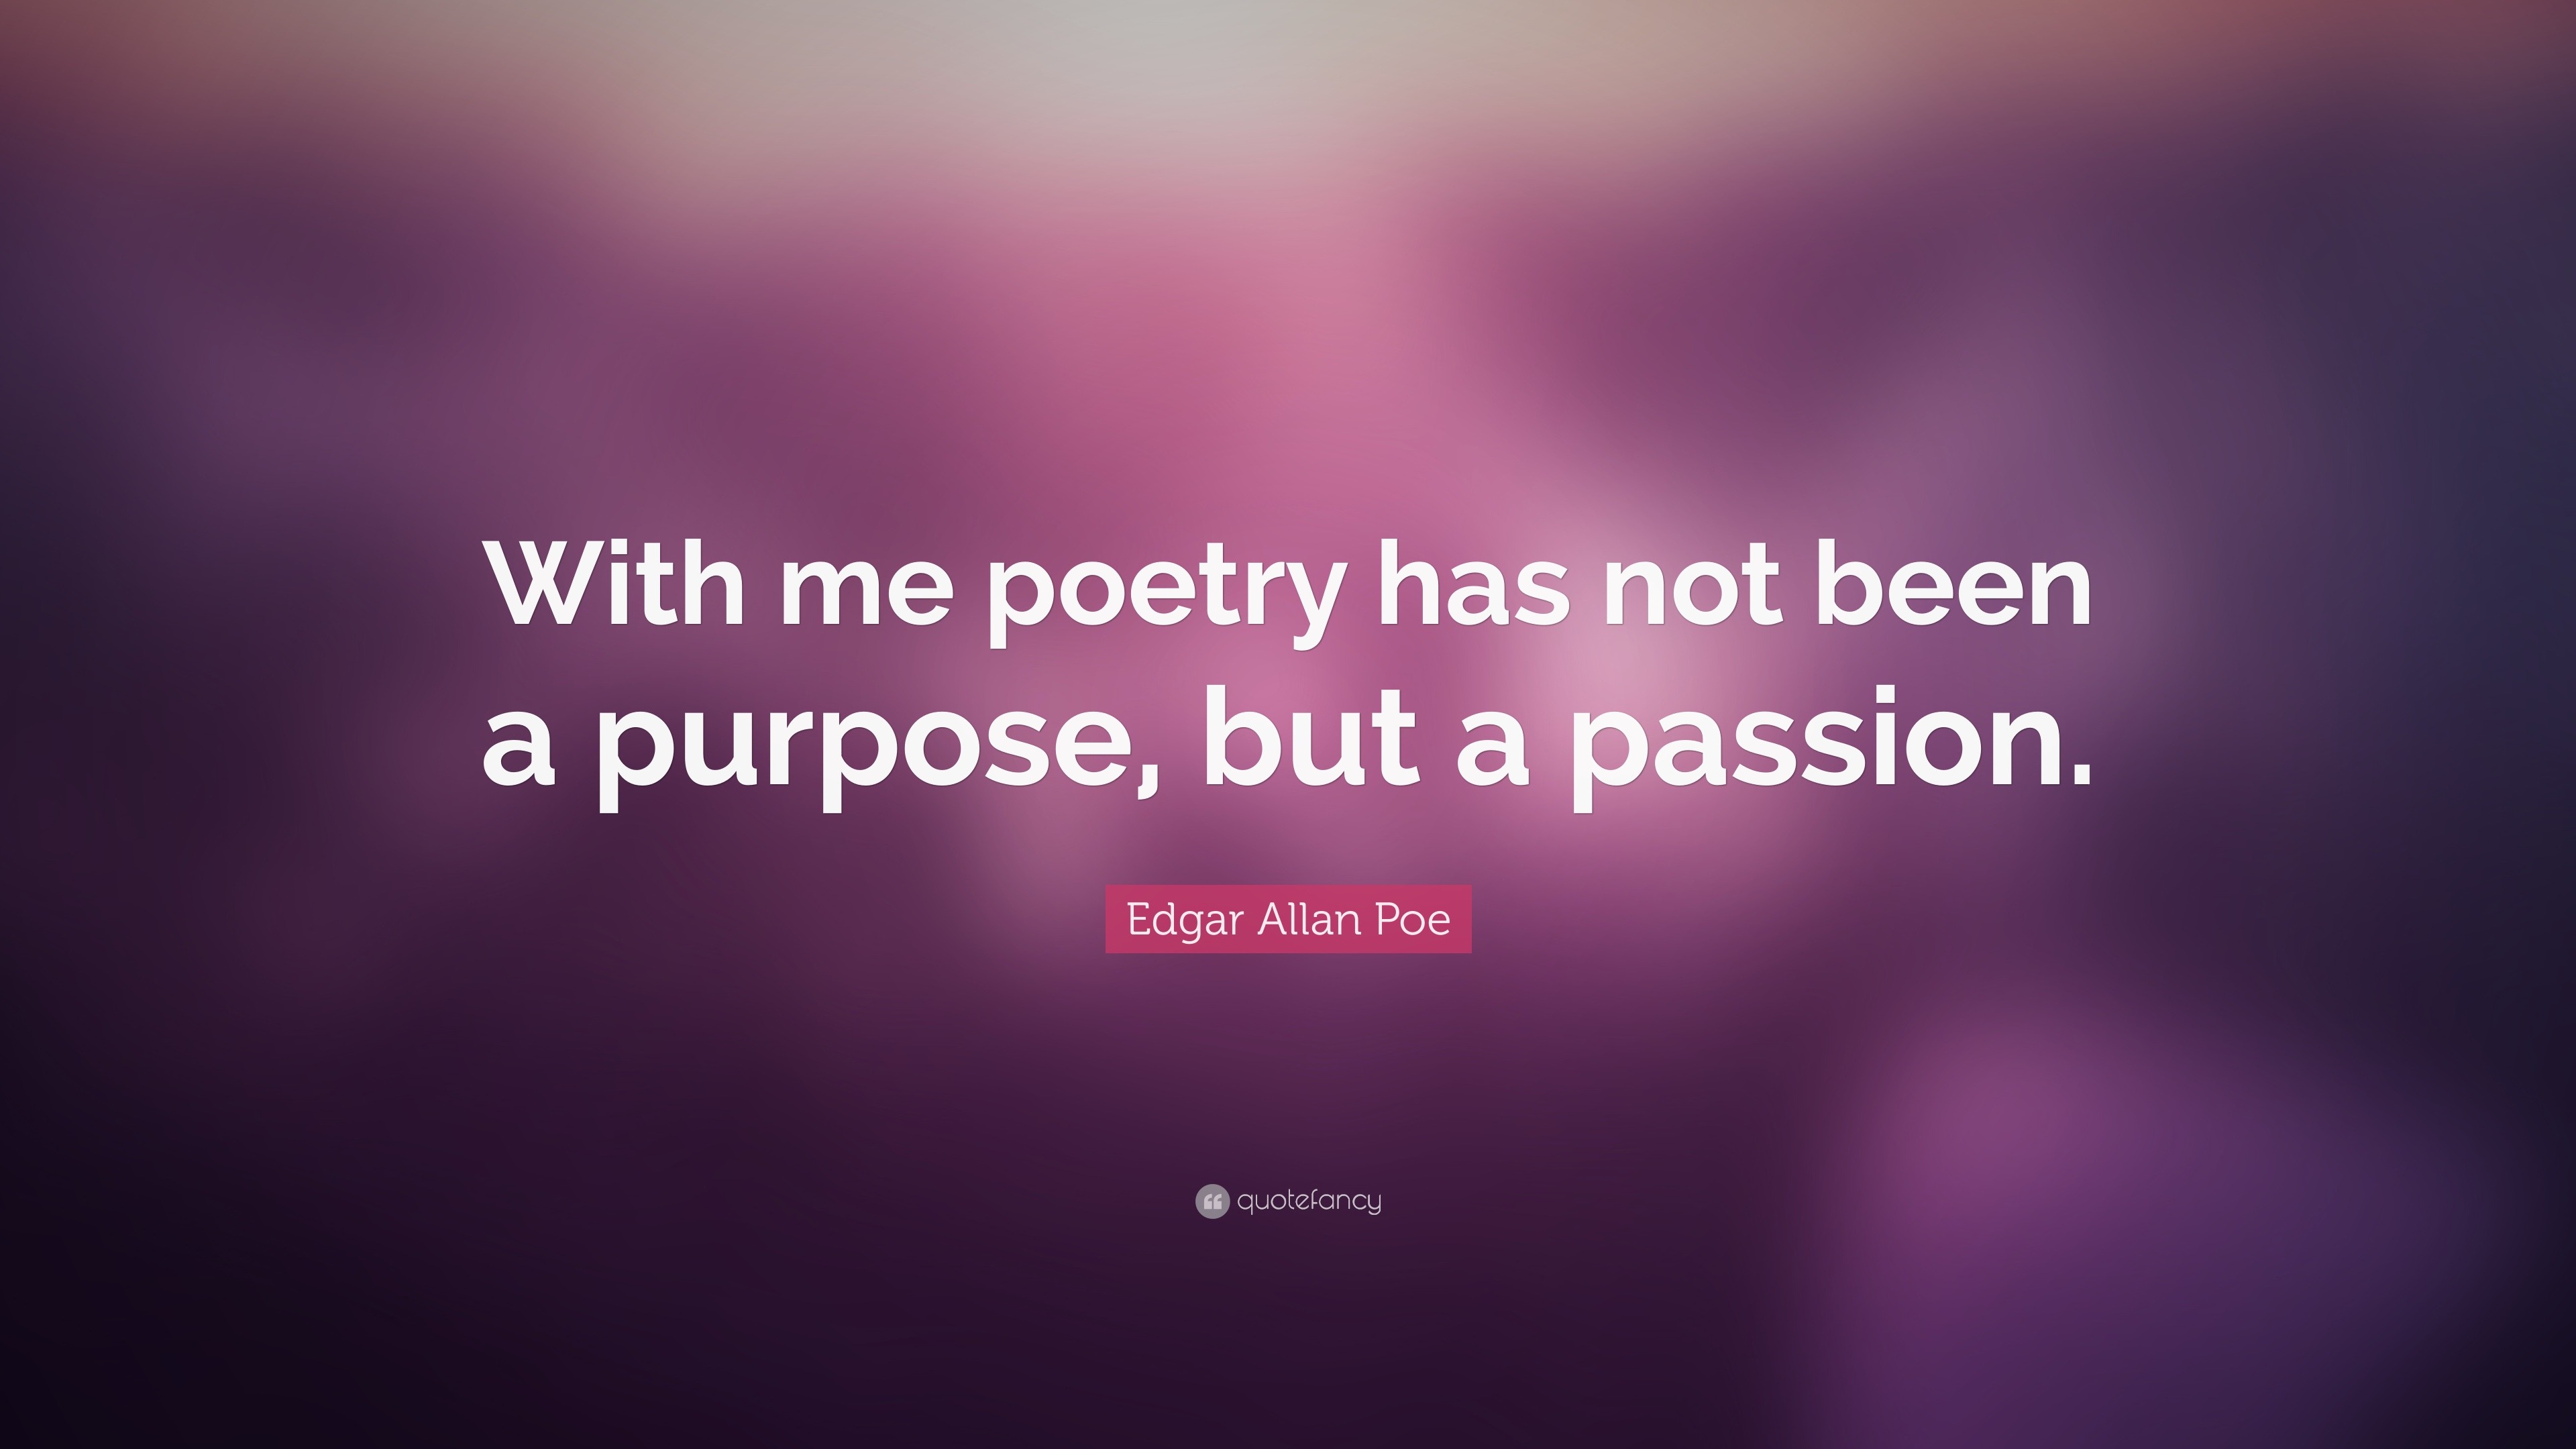 Edgar Allan Poe Quote: “With me poetry has not been a purpose, but a ...